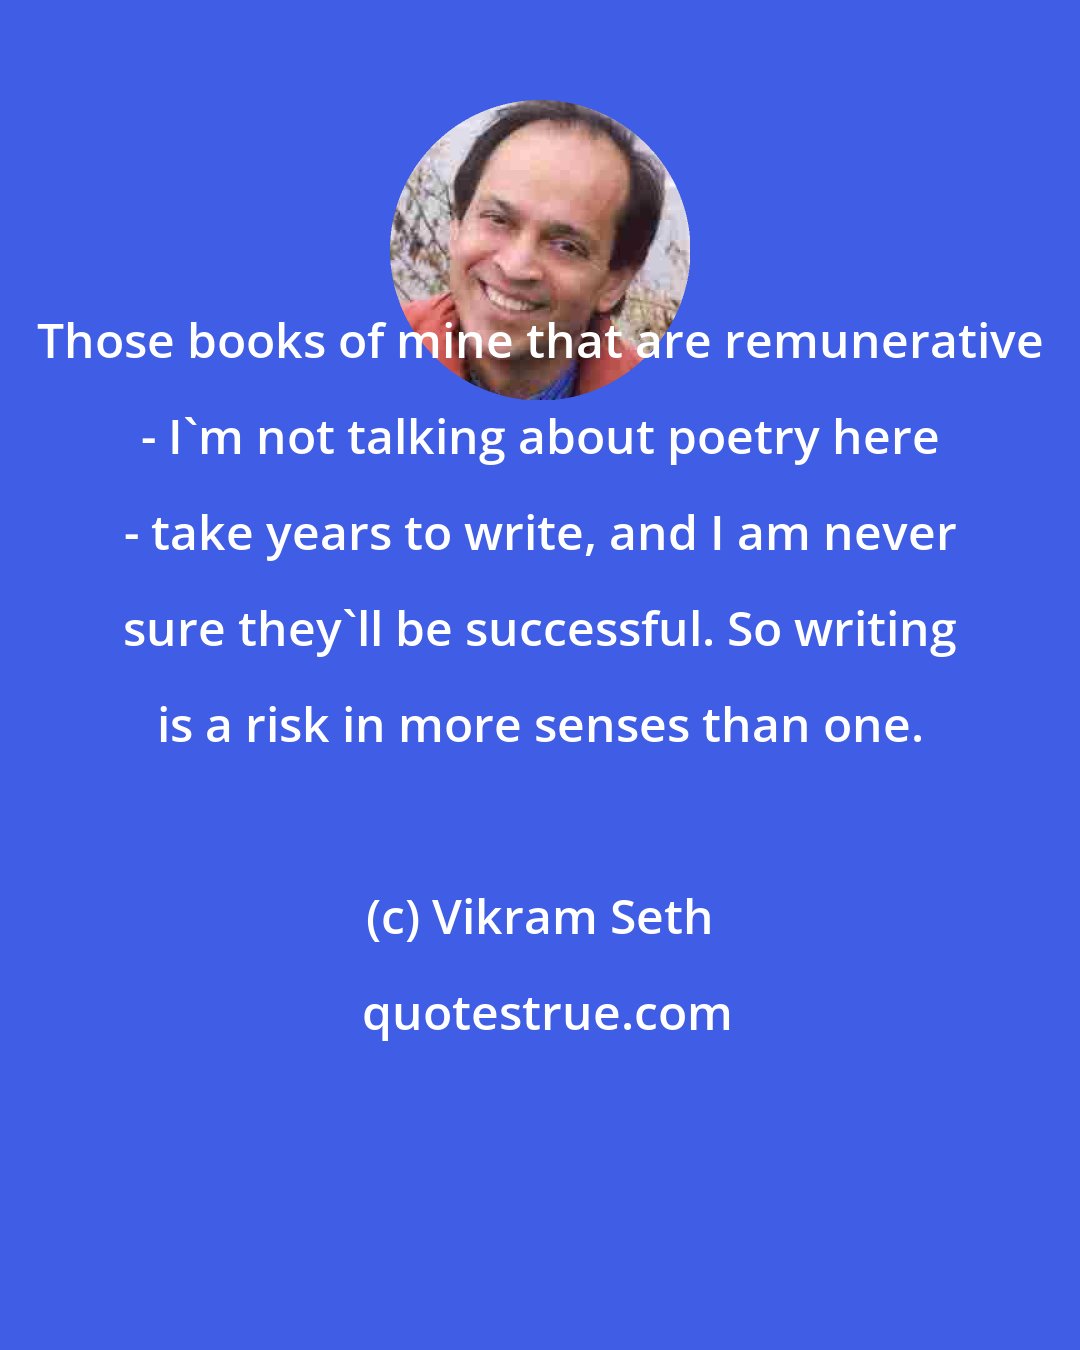 Vikram Seth: Those books of mine that are remunerative - I'm not talking about poetry here - take years to write, and I am never sure they'll be successful. So writing is a risk in more senses than one.